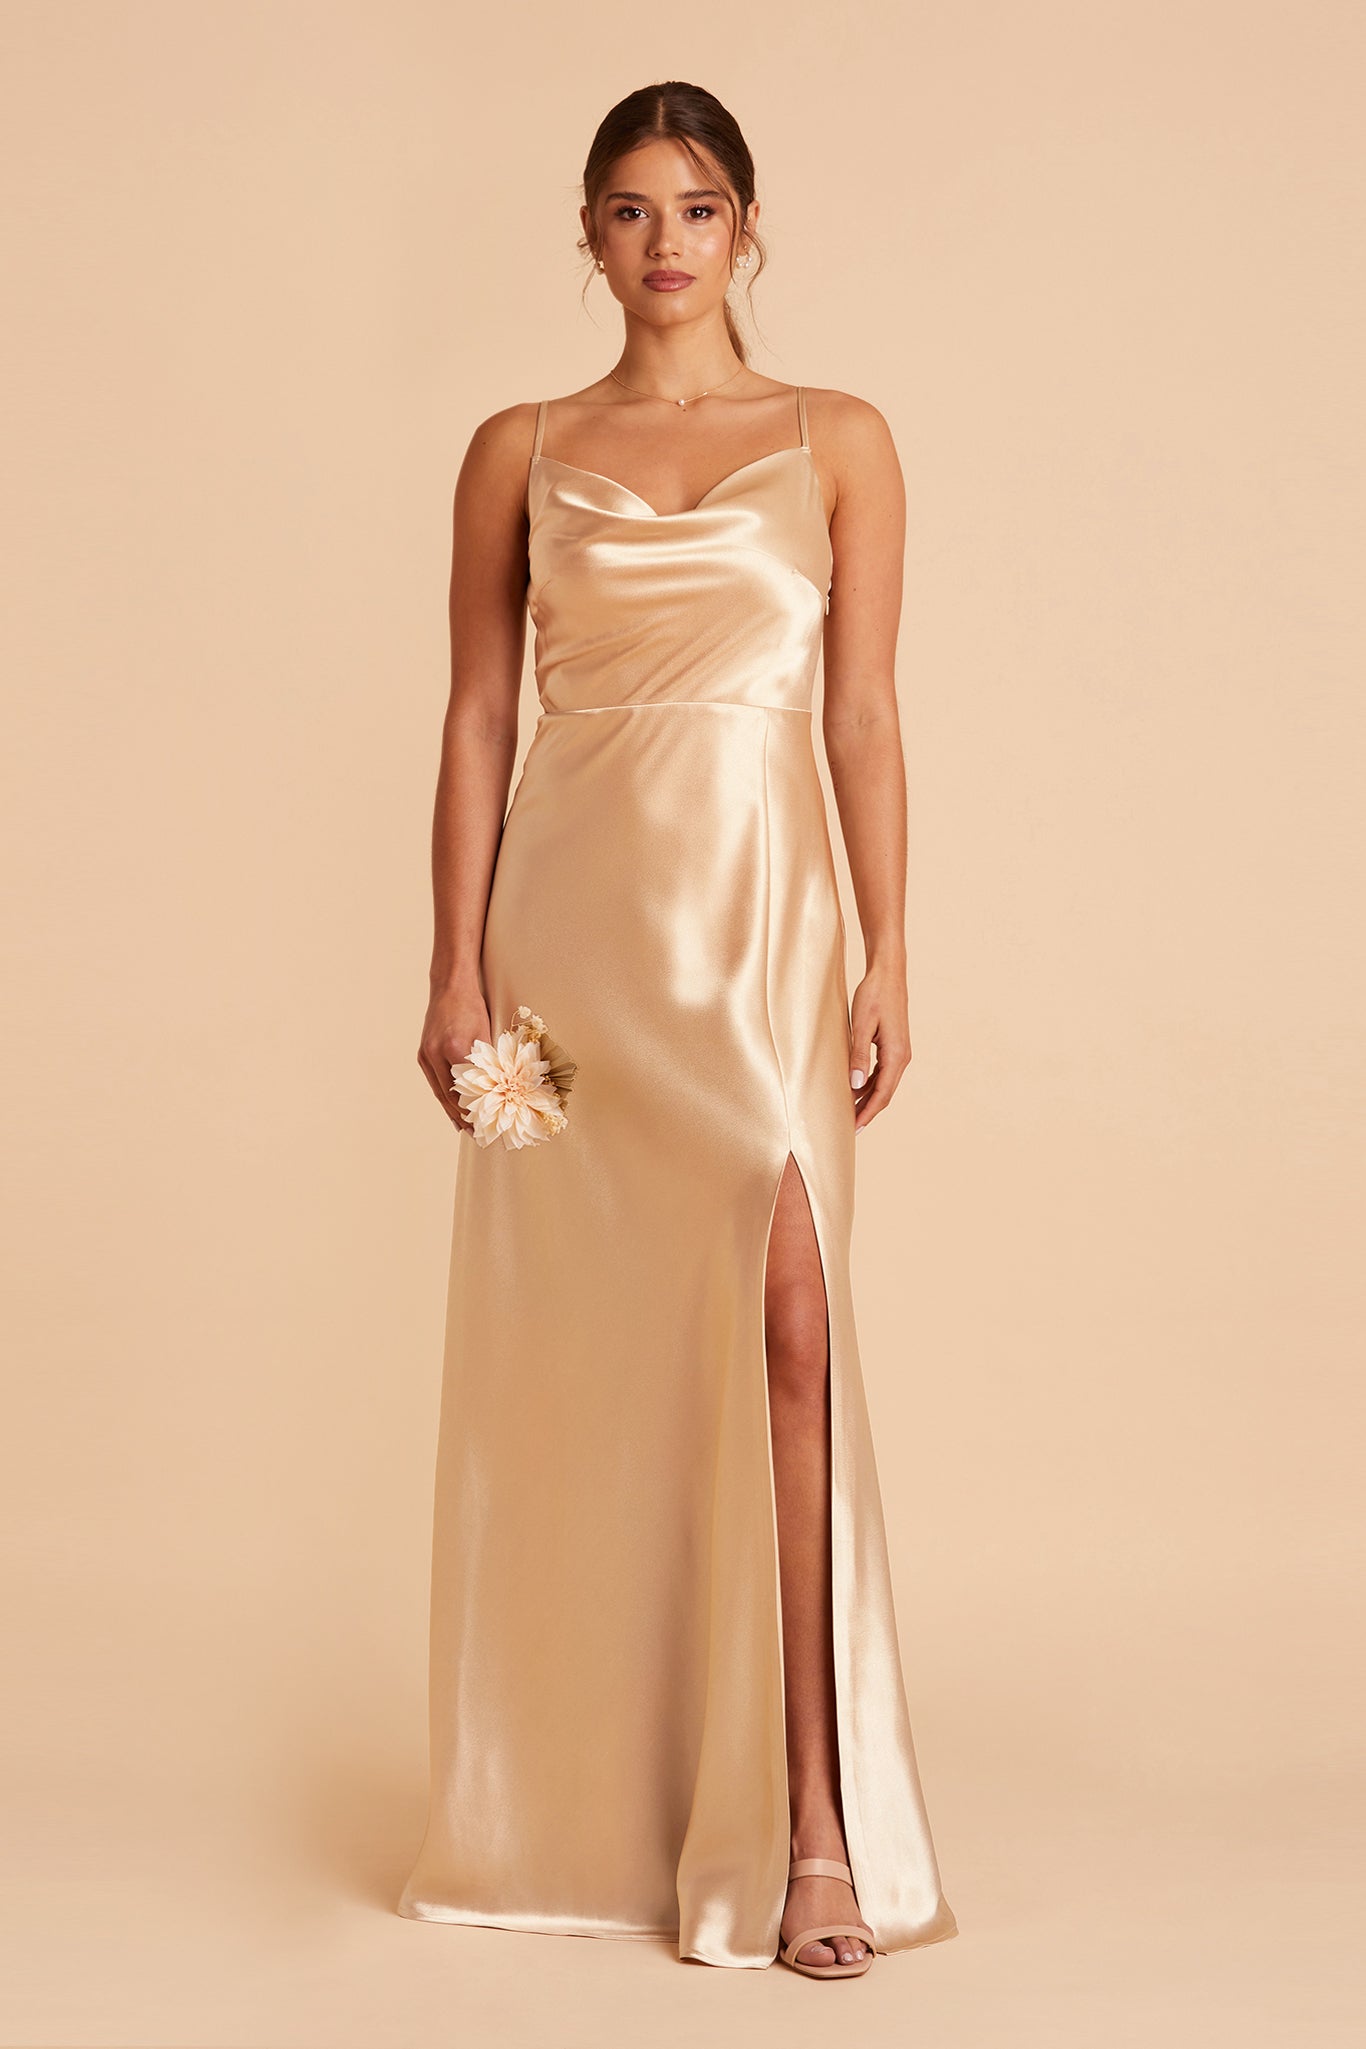 Front view of the Lisa Long Dress in gold satin shows a slender model with a light skin tone wearing a lightly draped cowl neck bodice with spaghetti straps and a floor-length flared dress with a slit. 